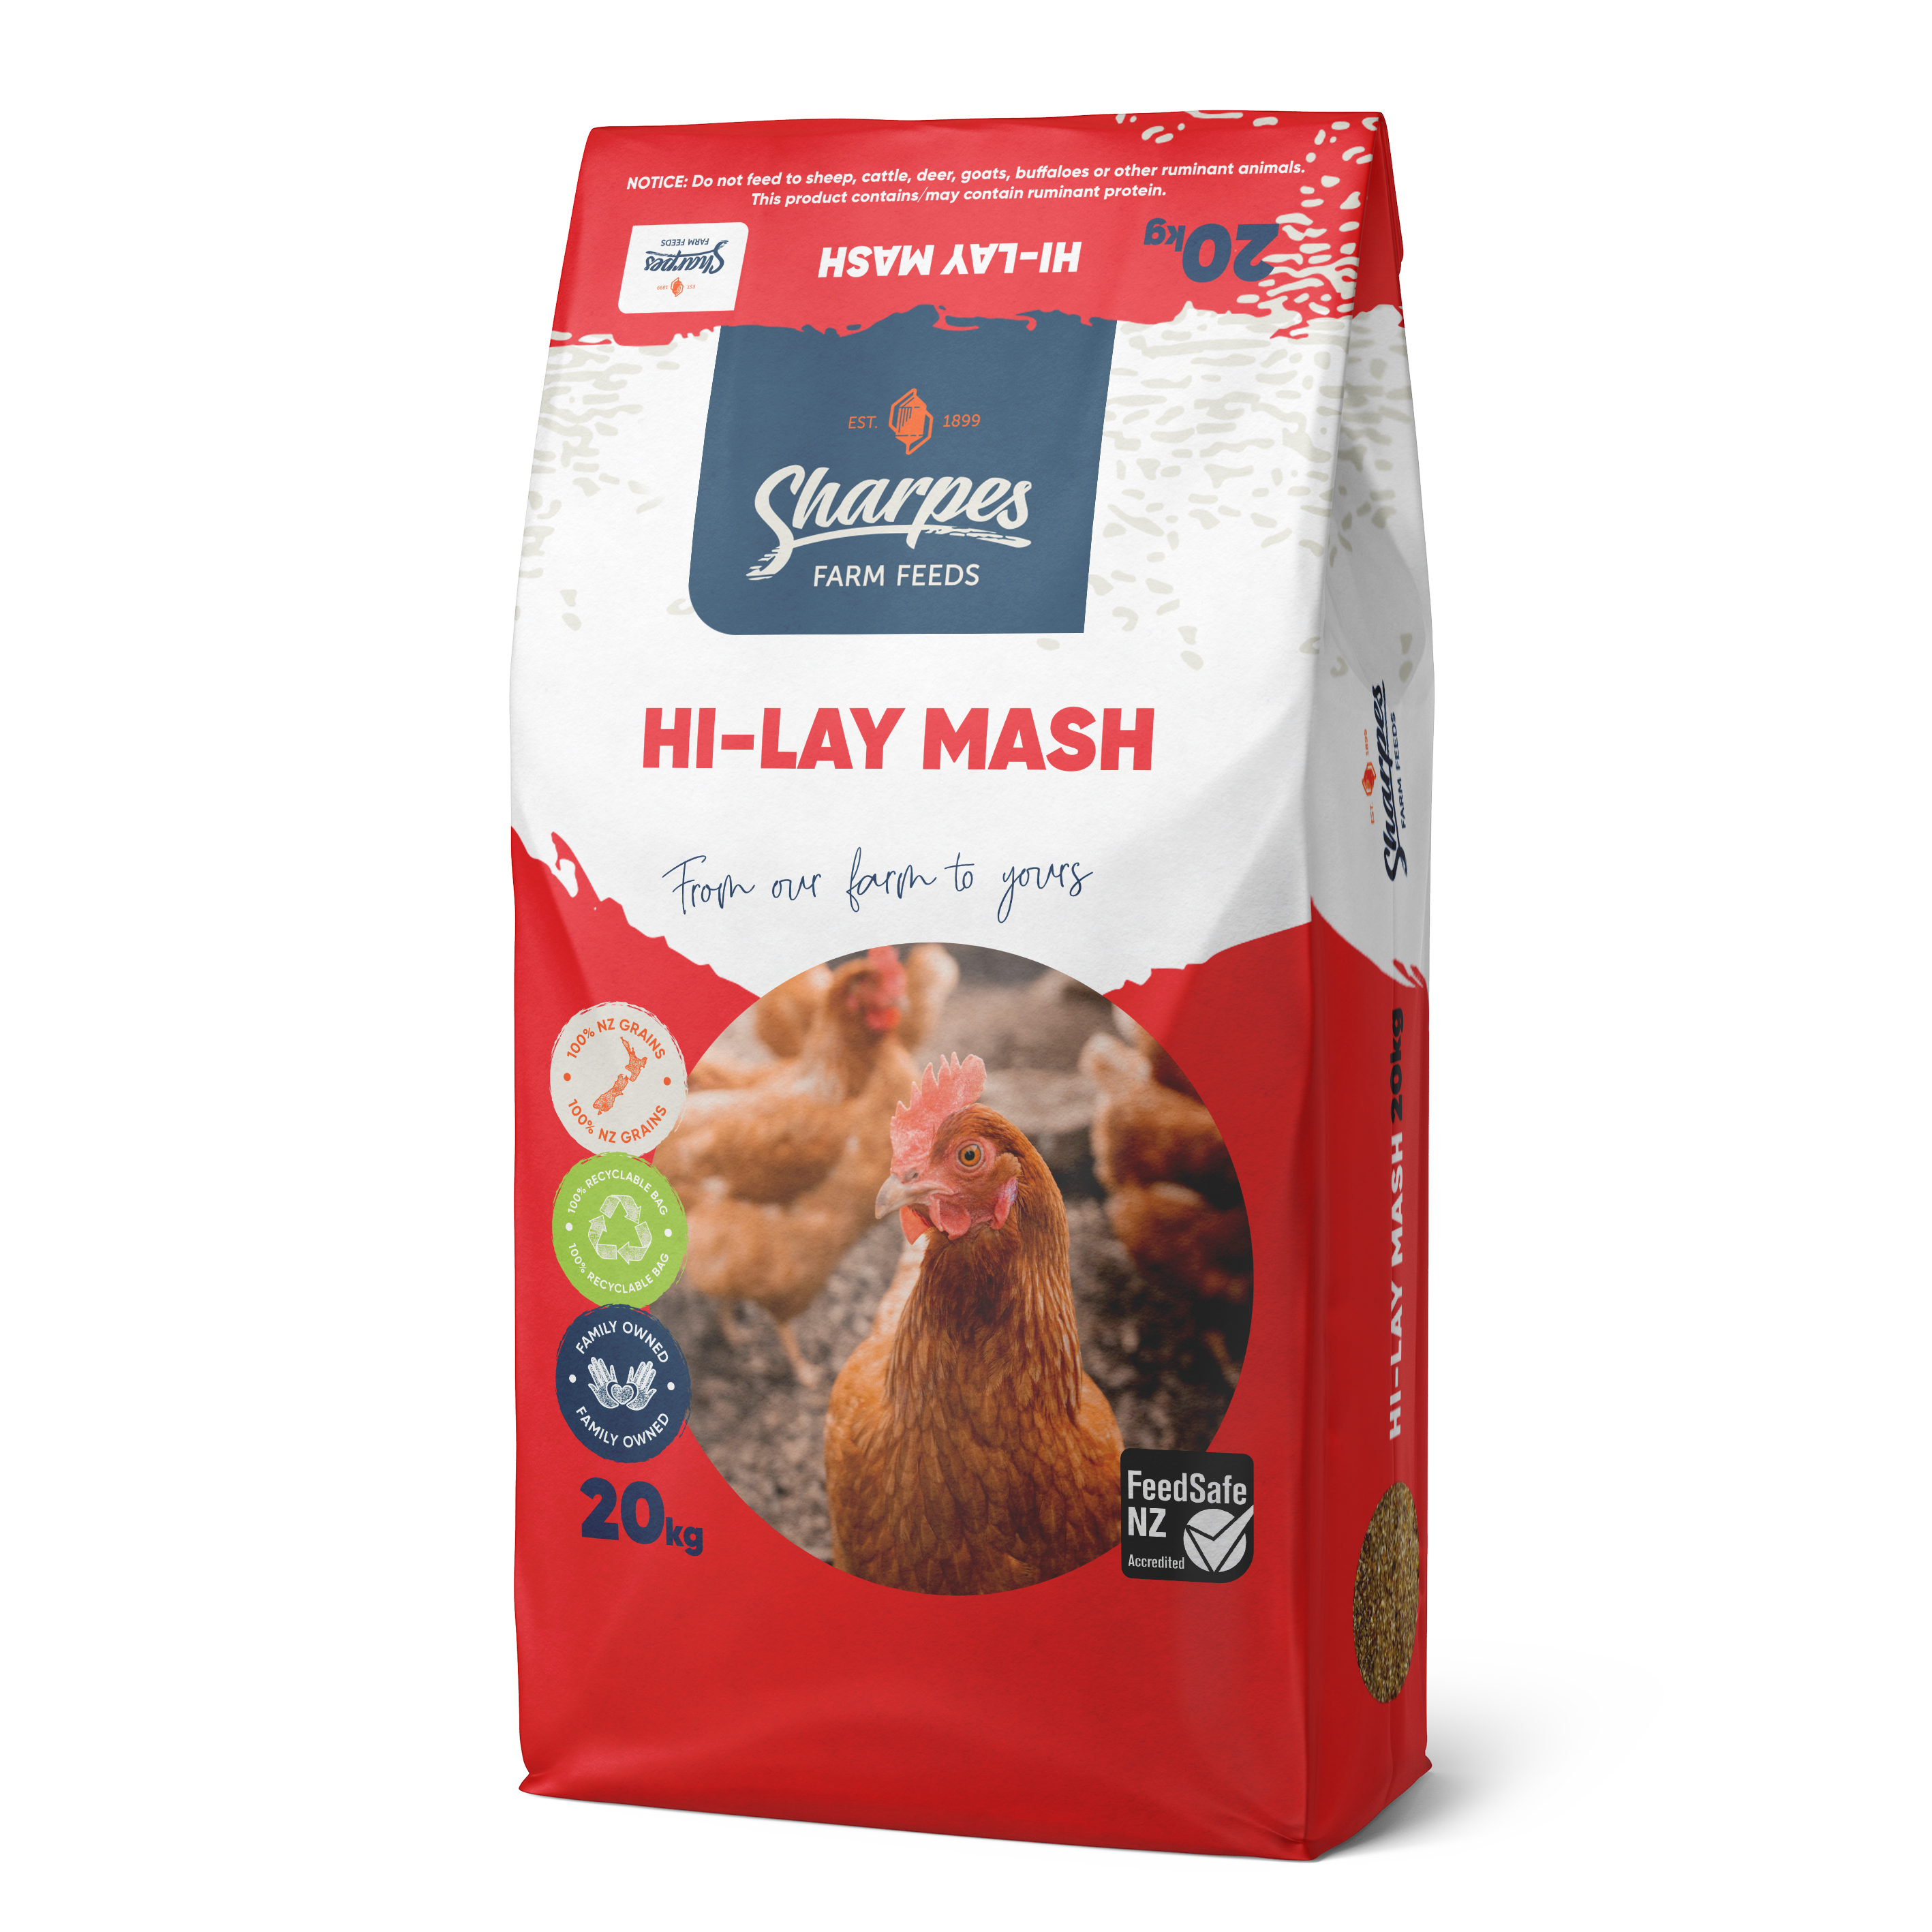 POULTRY - Sharpes Stock Feeds